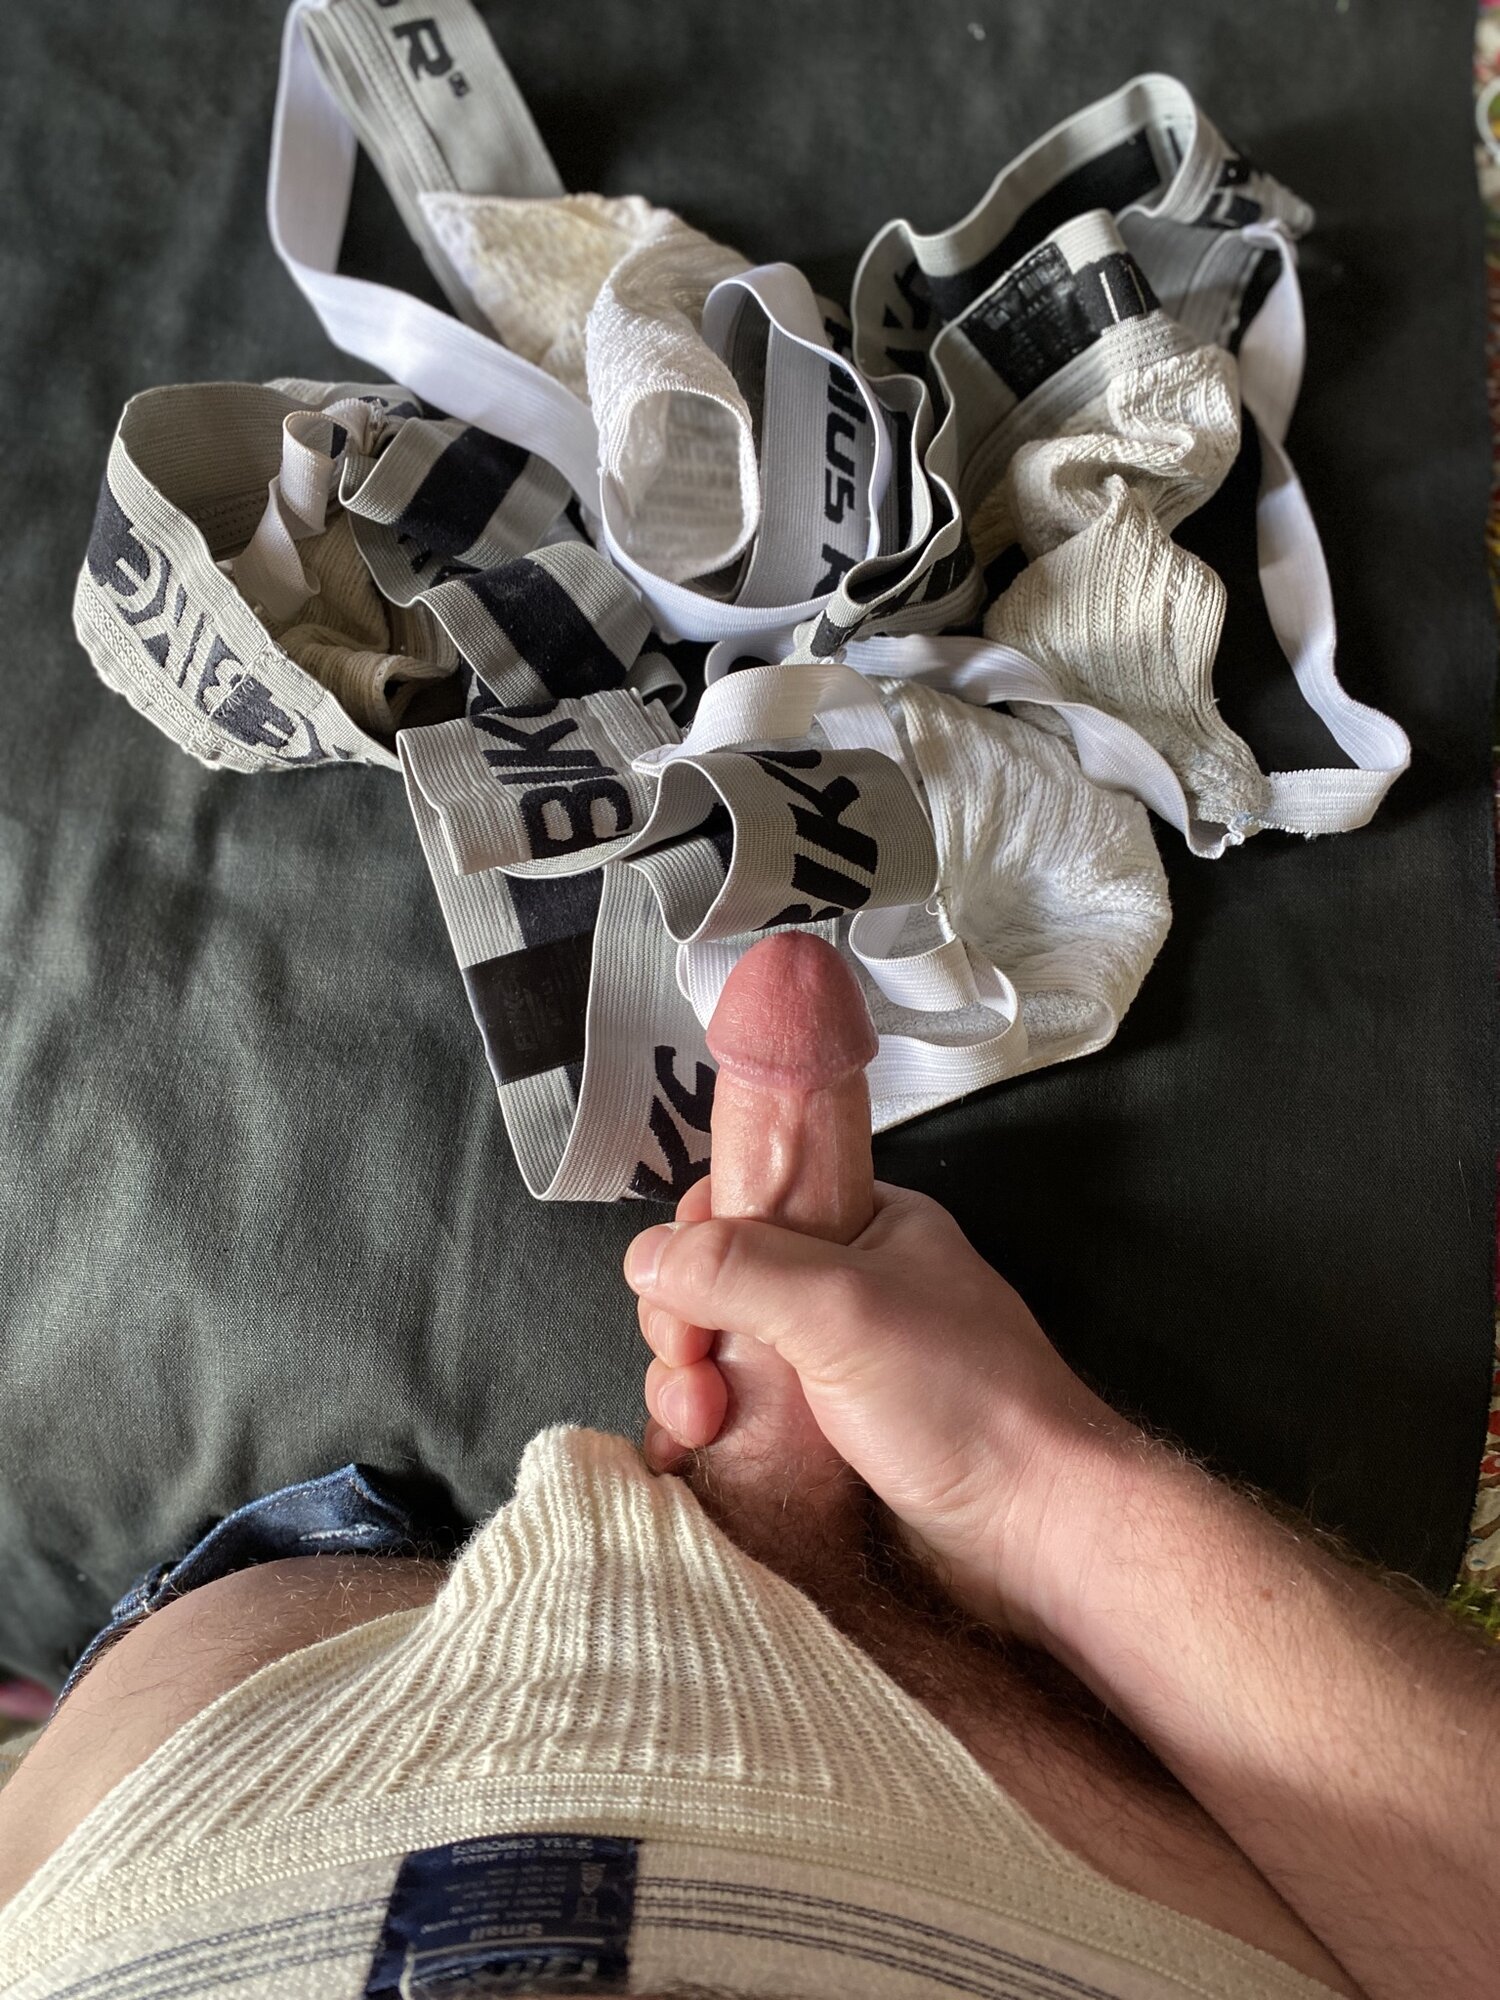 Blowing my load on a pile of dirty and ripe straps